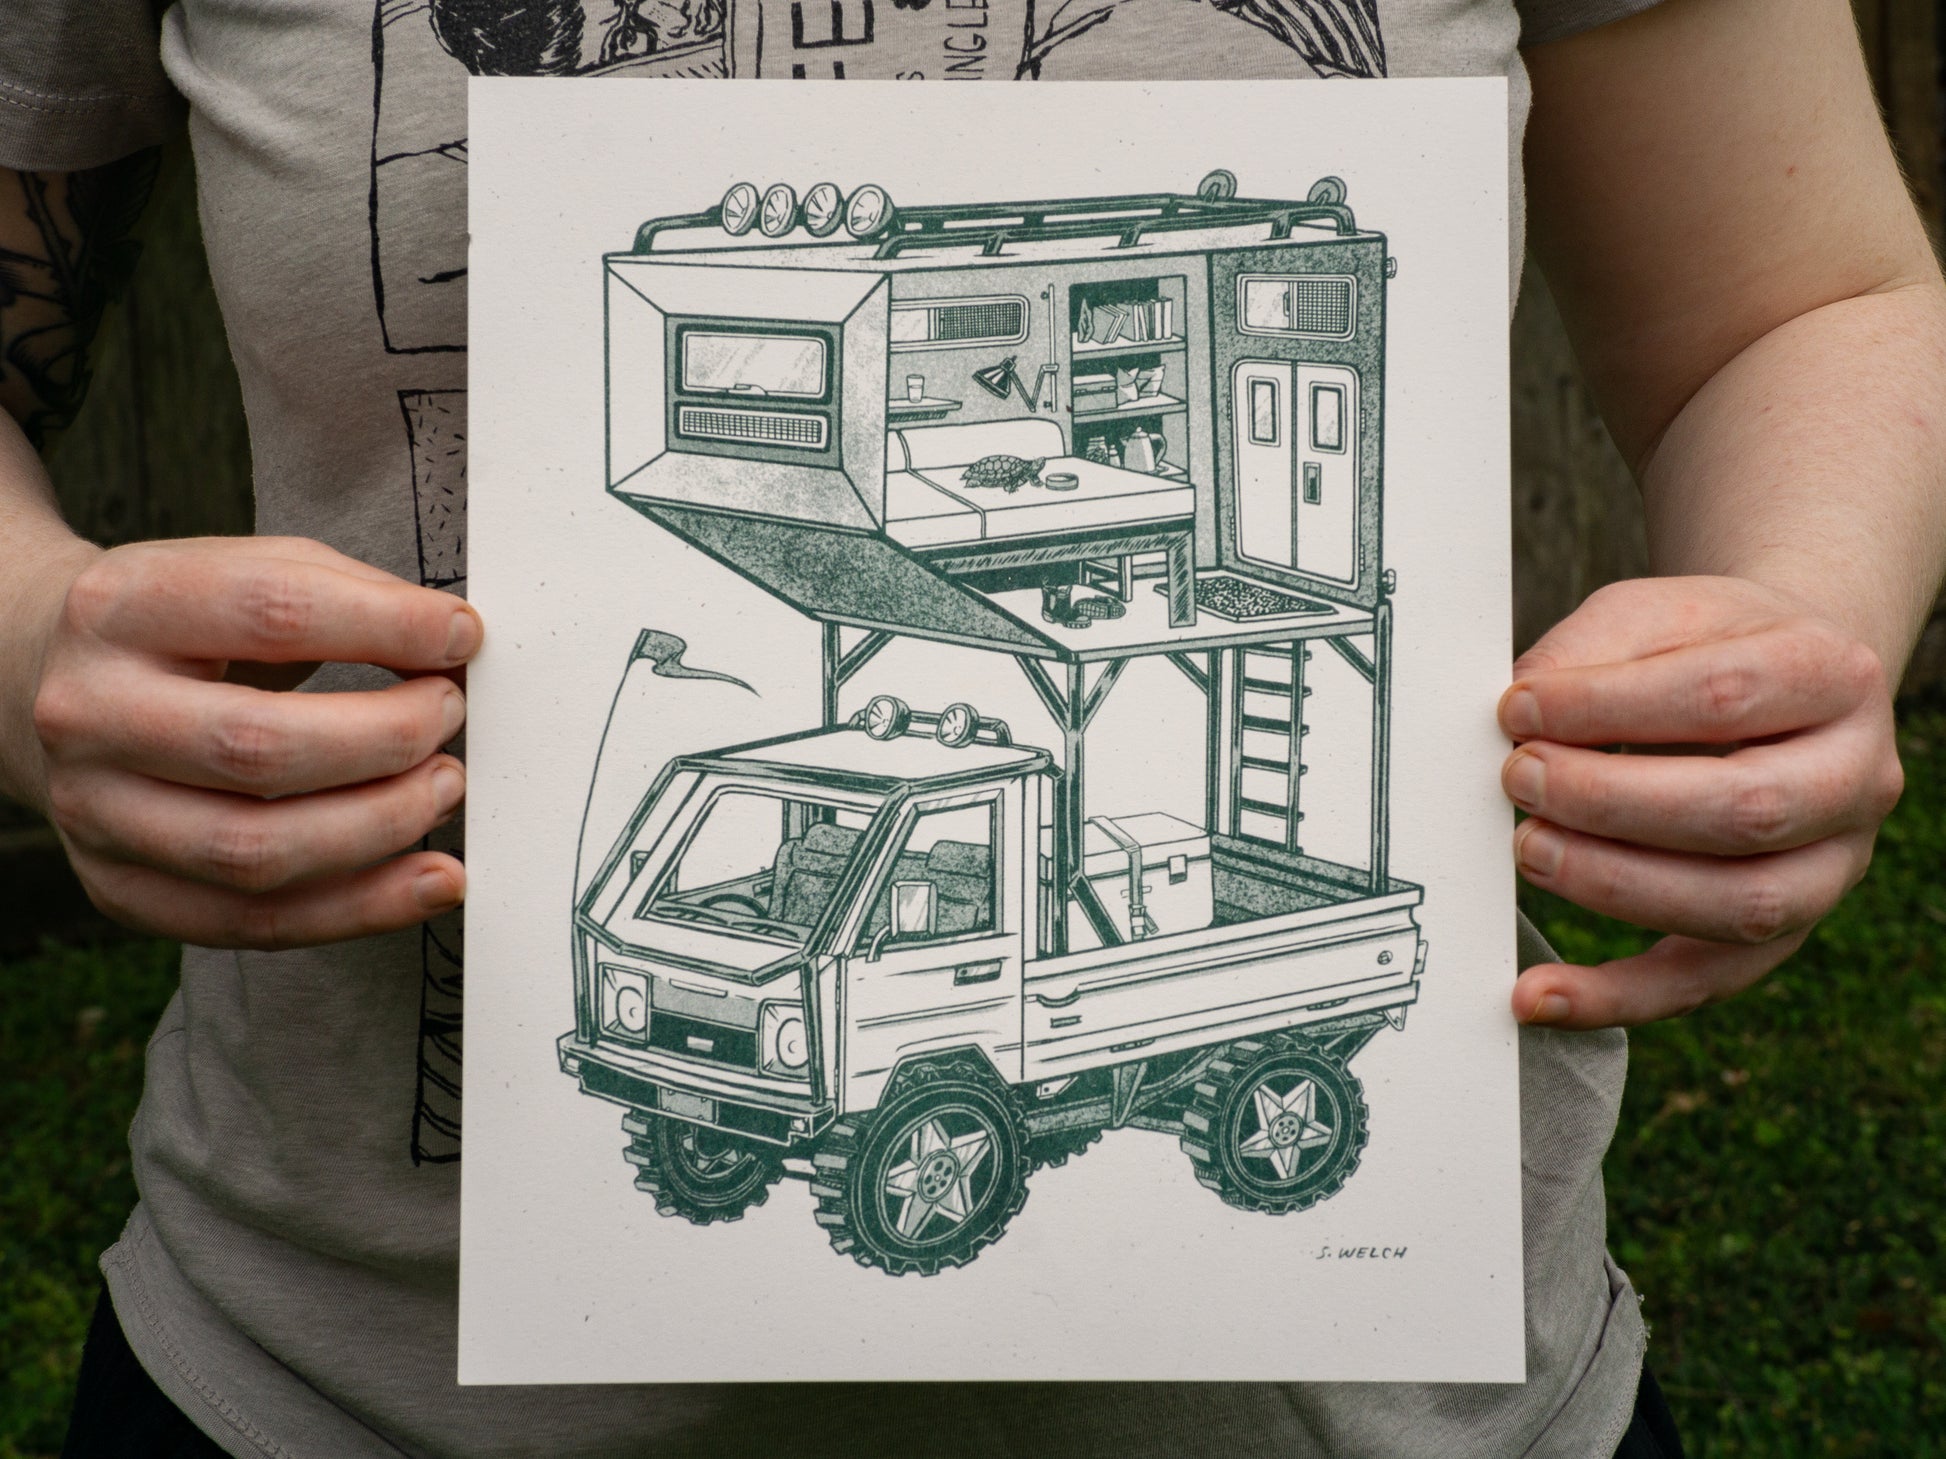 A kei truck art print. The truck has been customized heavily, and has a living space built above the truck bed.